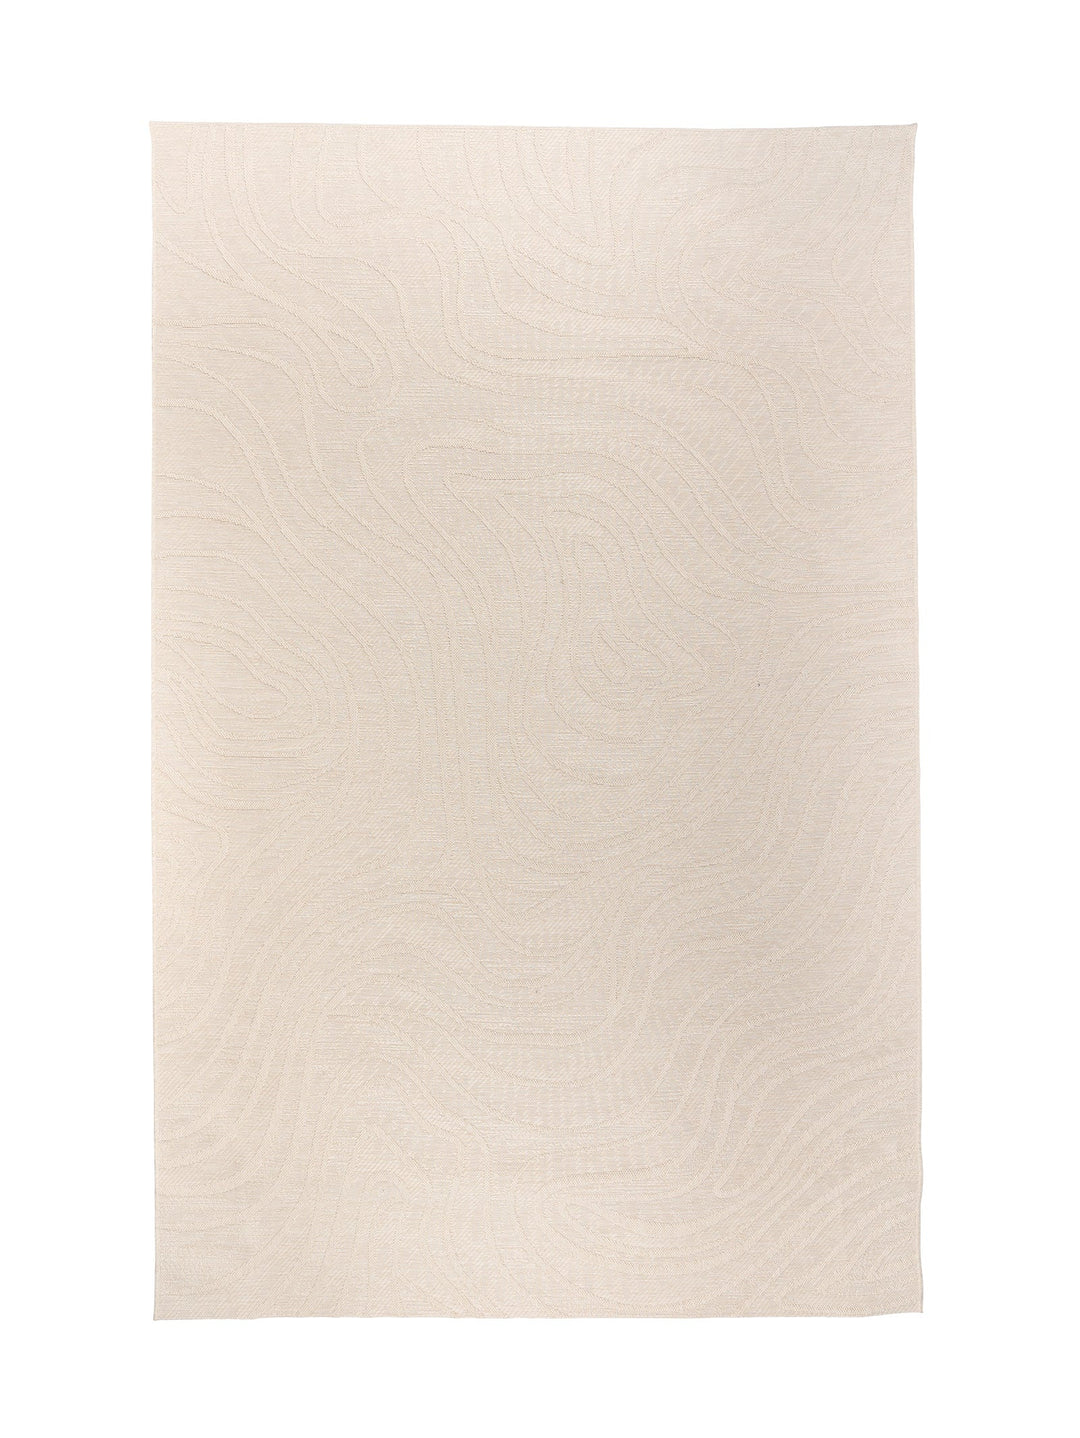 Syncline Outdoor Rug in Whipped Cream - outdoor rug- Hertex Haus Online - badge_fully_outdoor